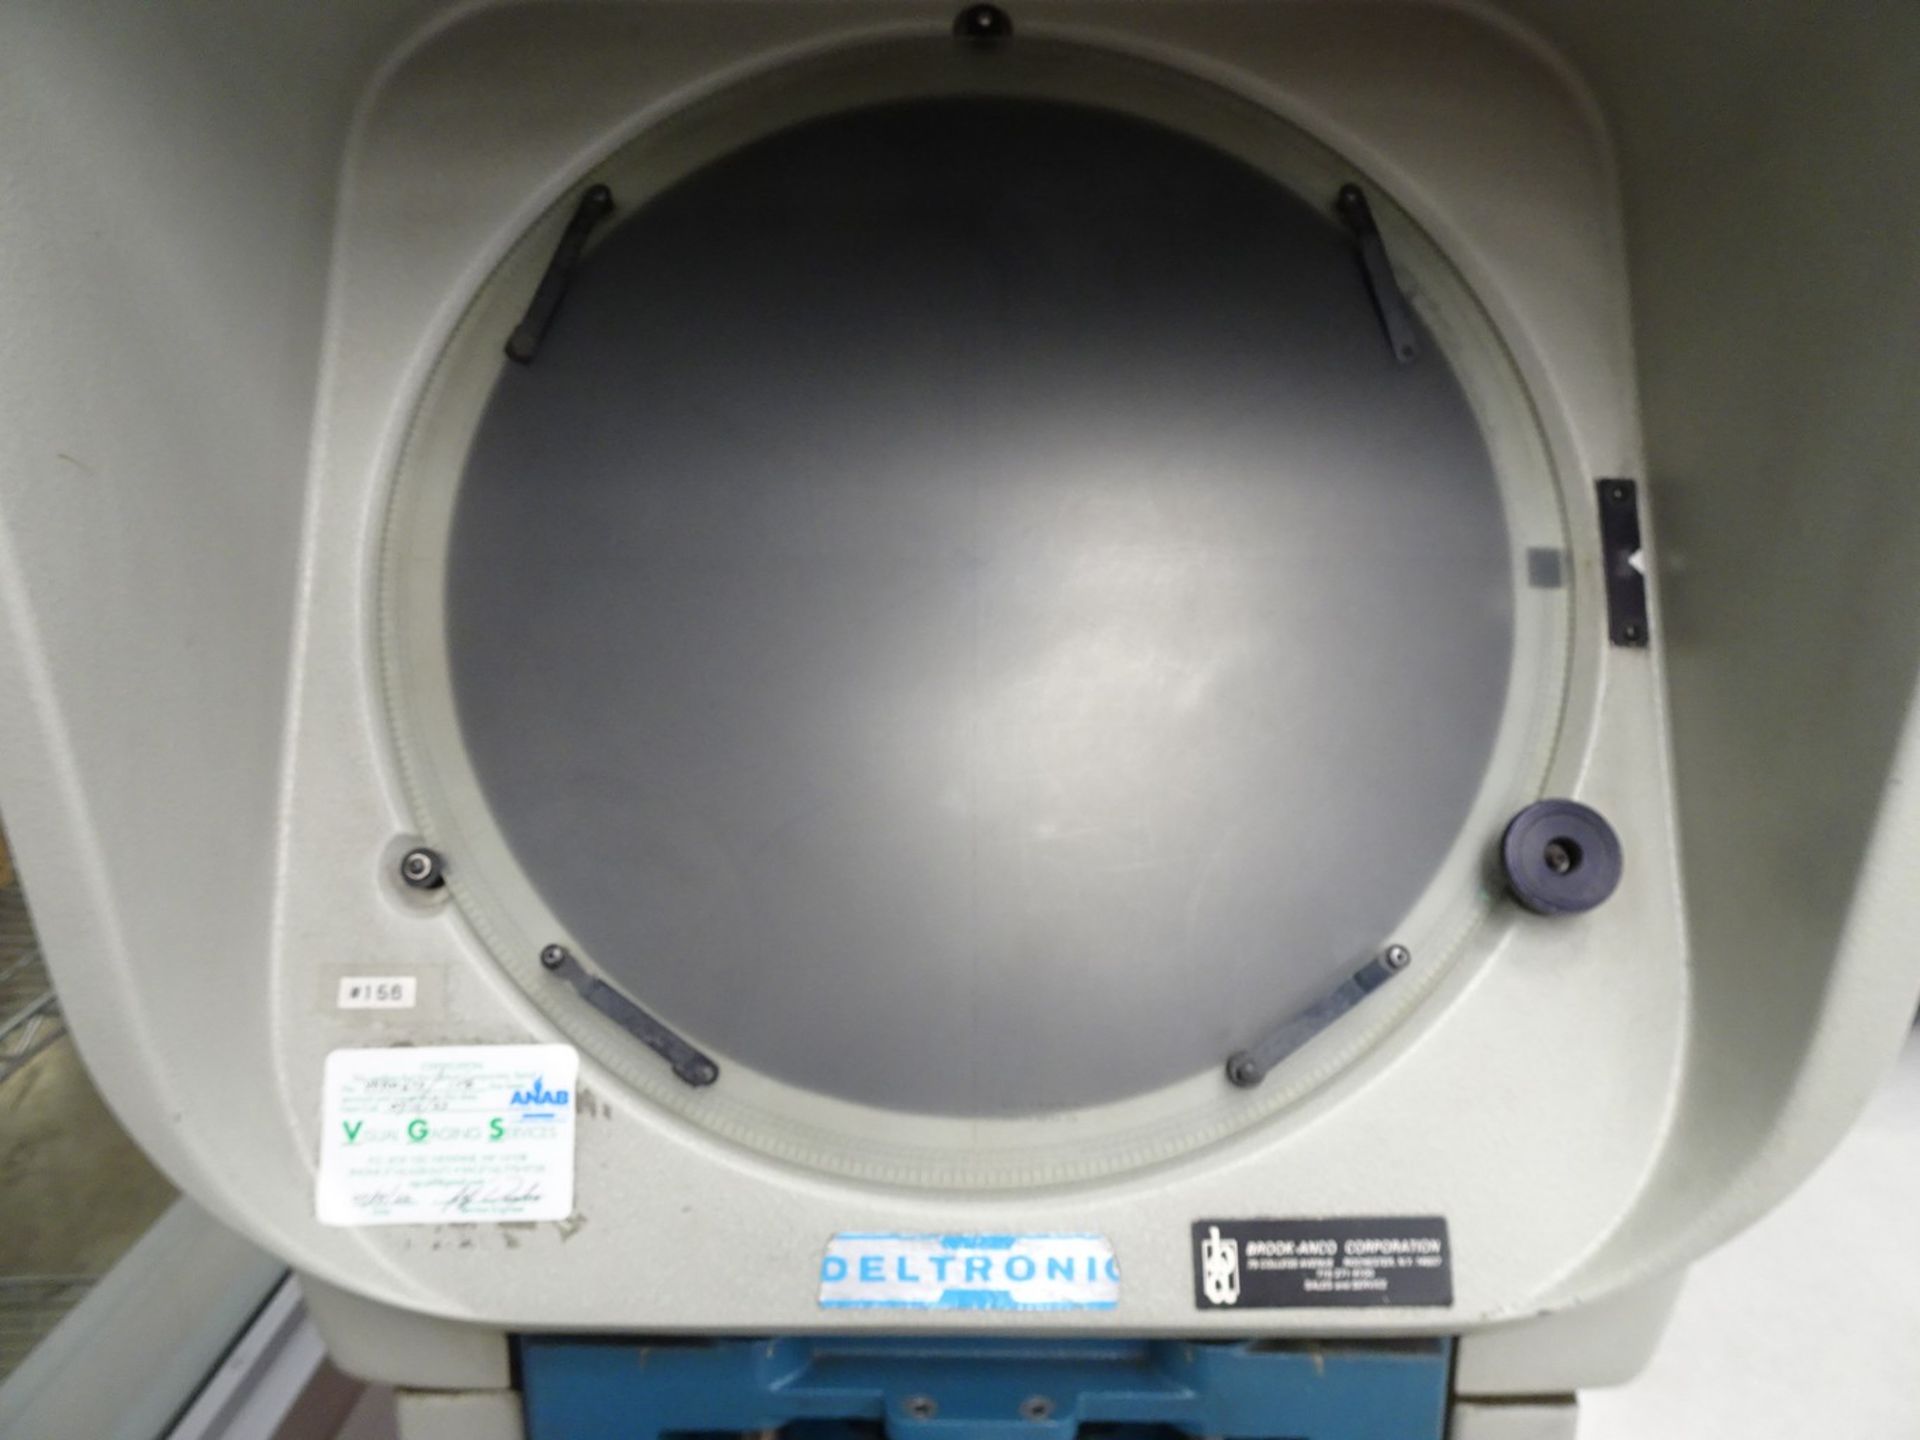 Deltronic DH14-MPC 14" Optical Comparator - Image 2 of 4